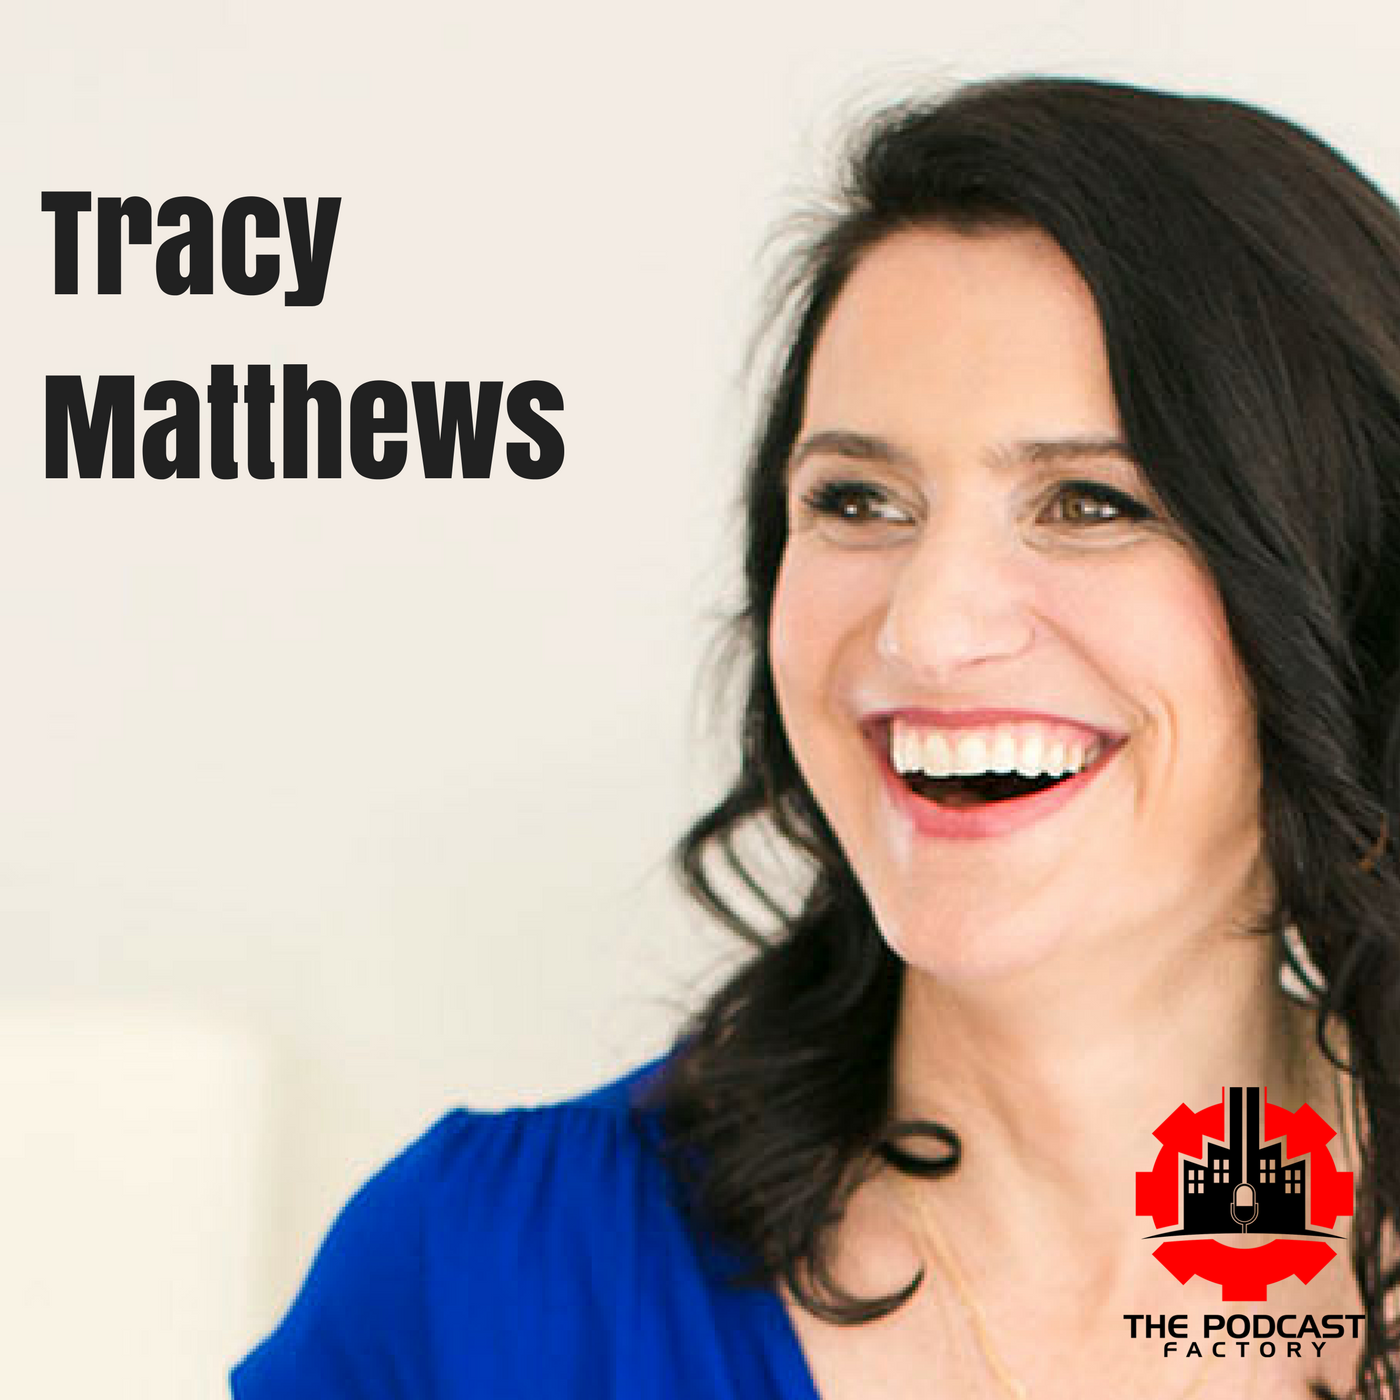 Tracy Matthews recommends The Podcast Factory